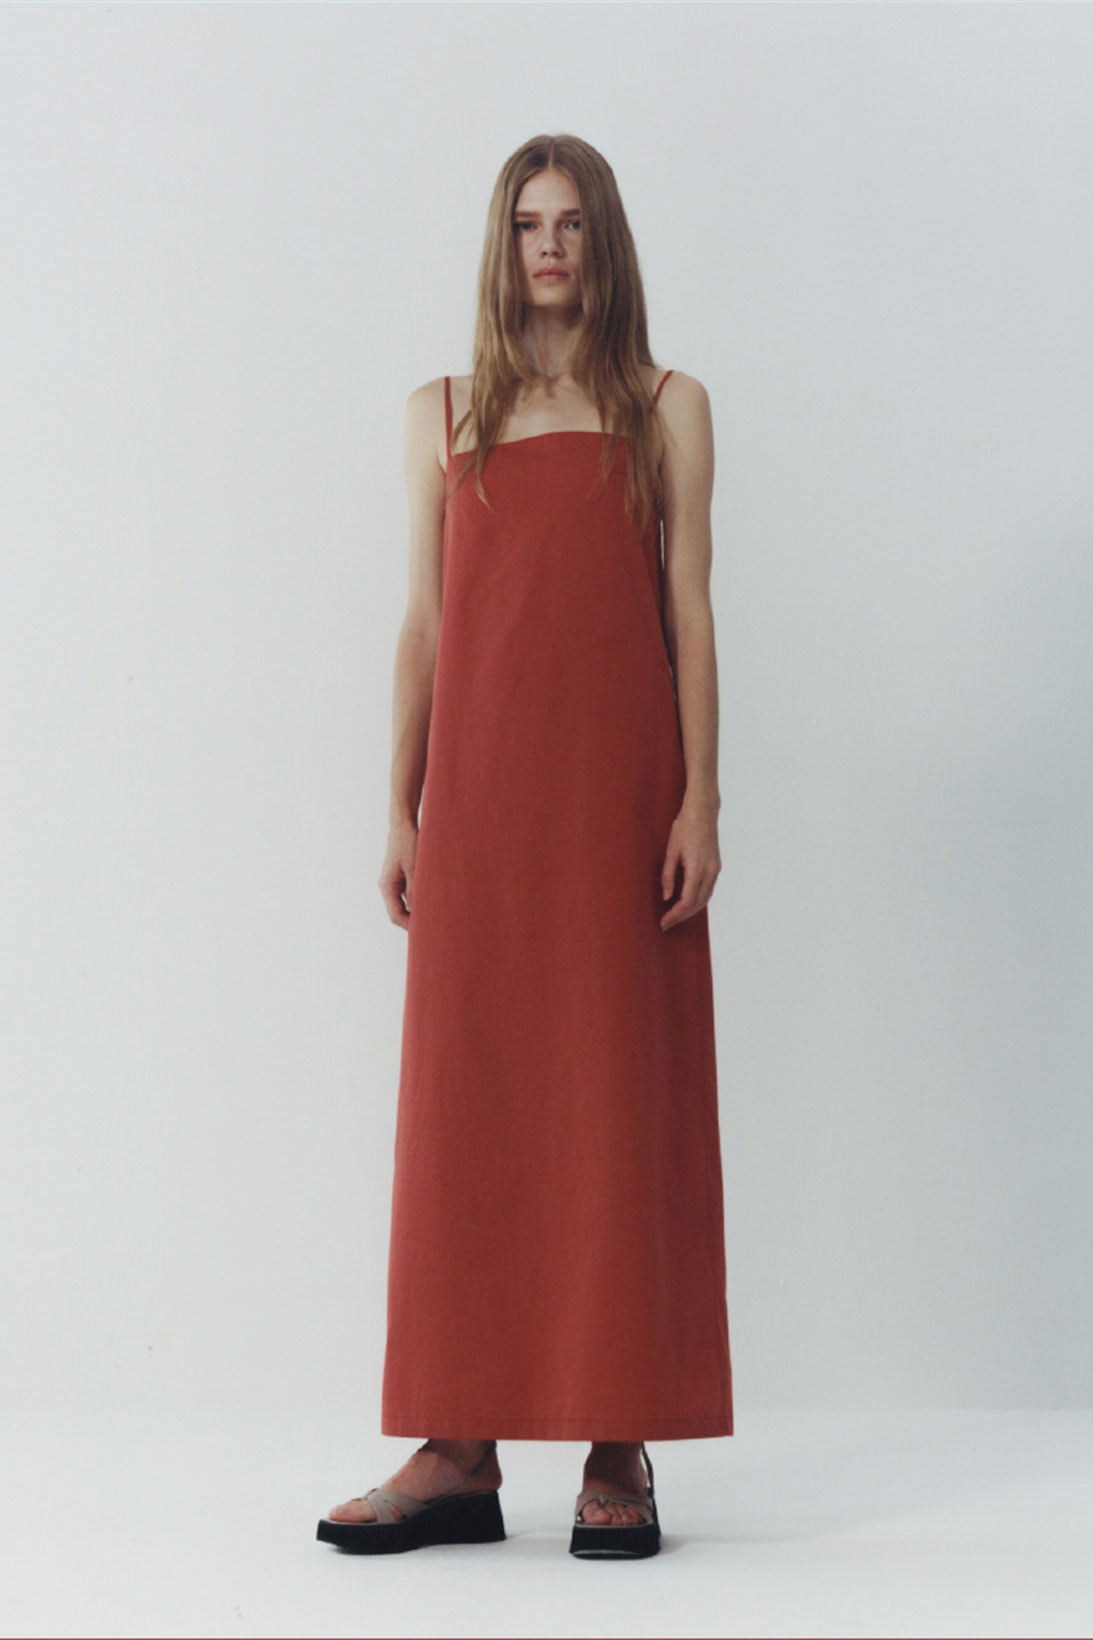 theopen product spring summer 2021 ss21 collection lookbook dress red